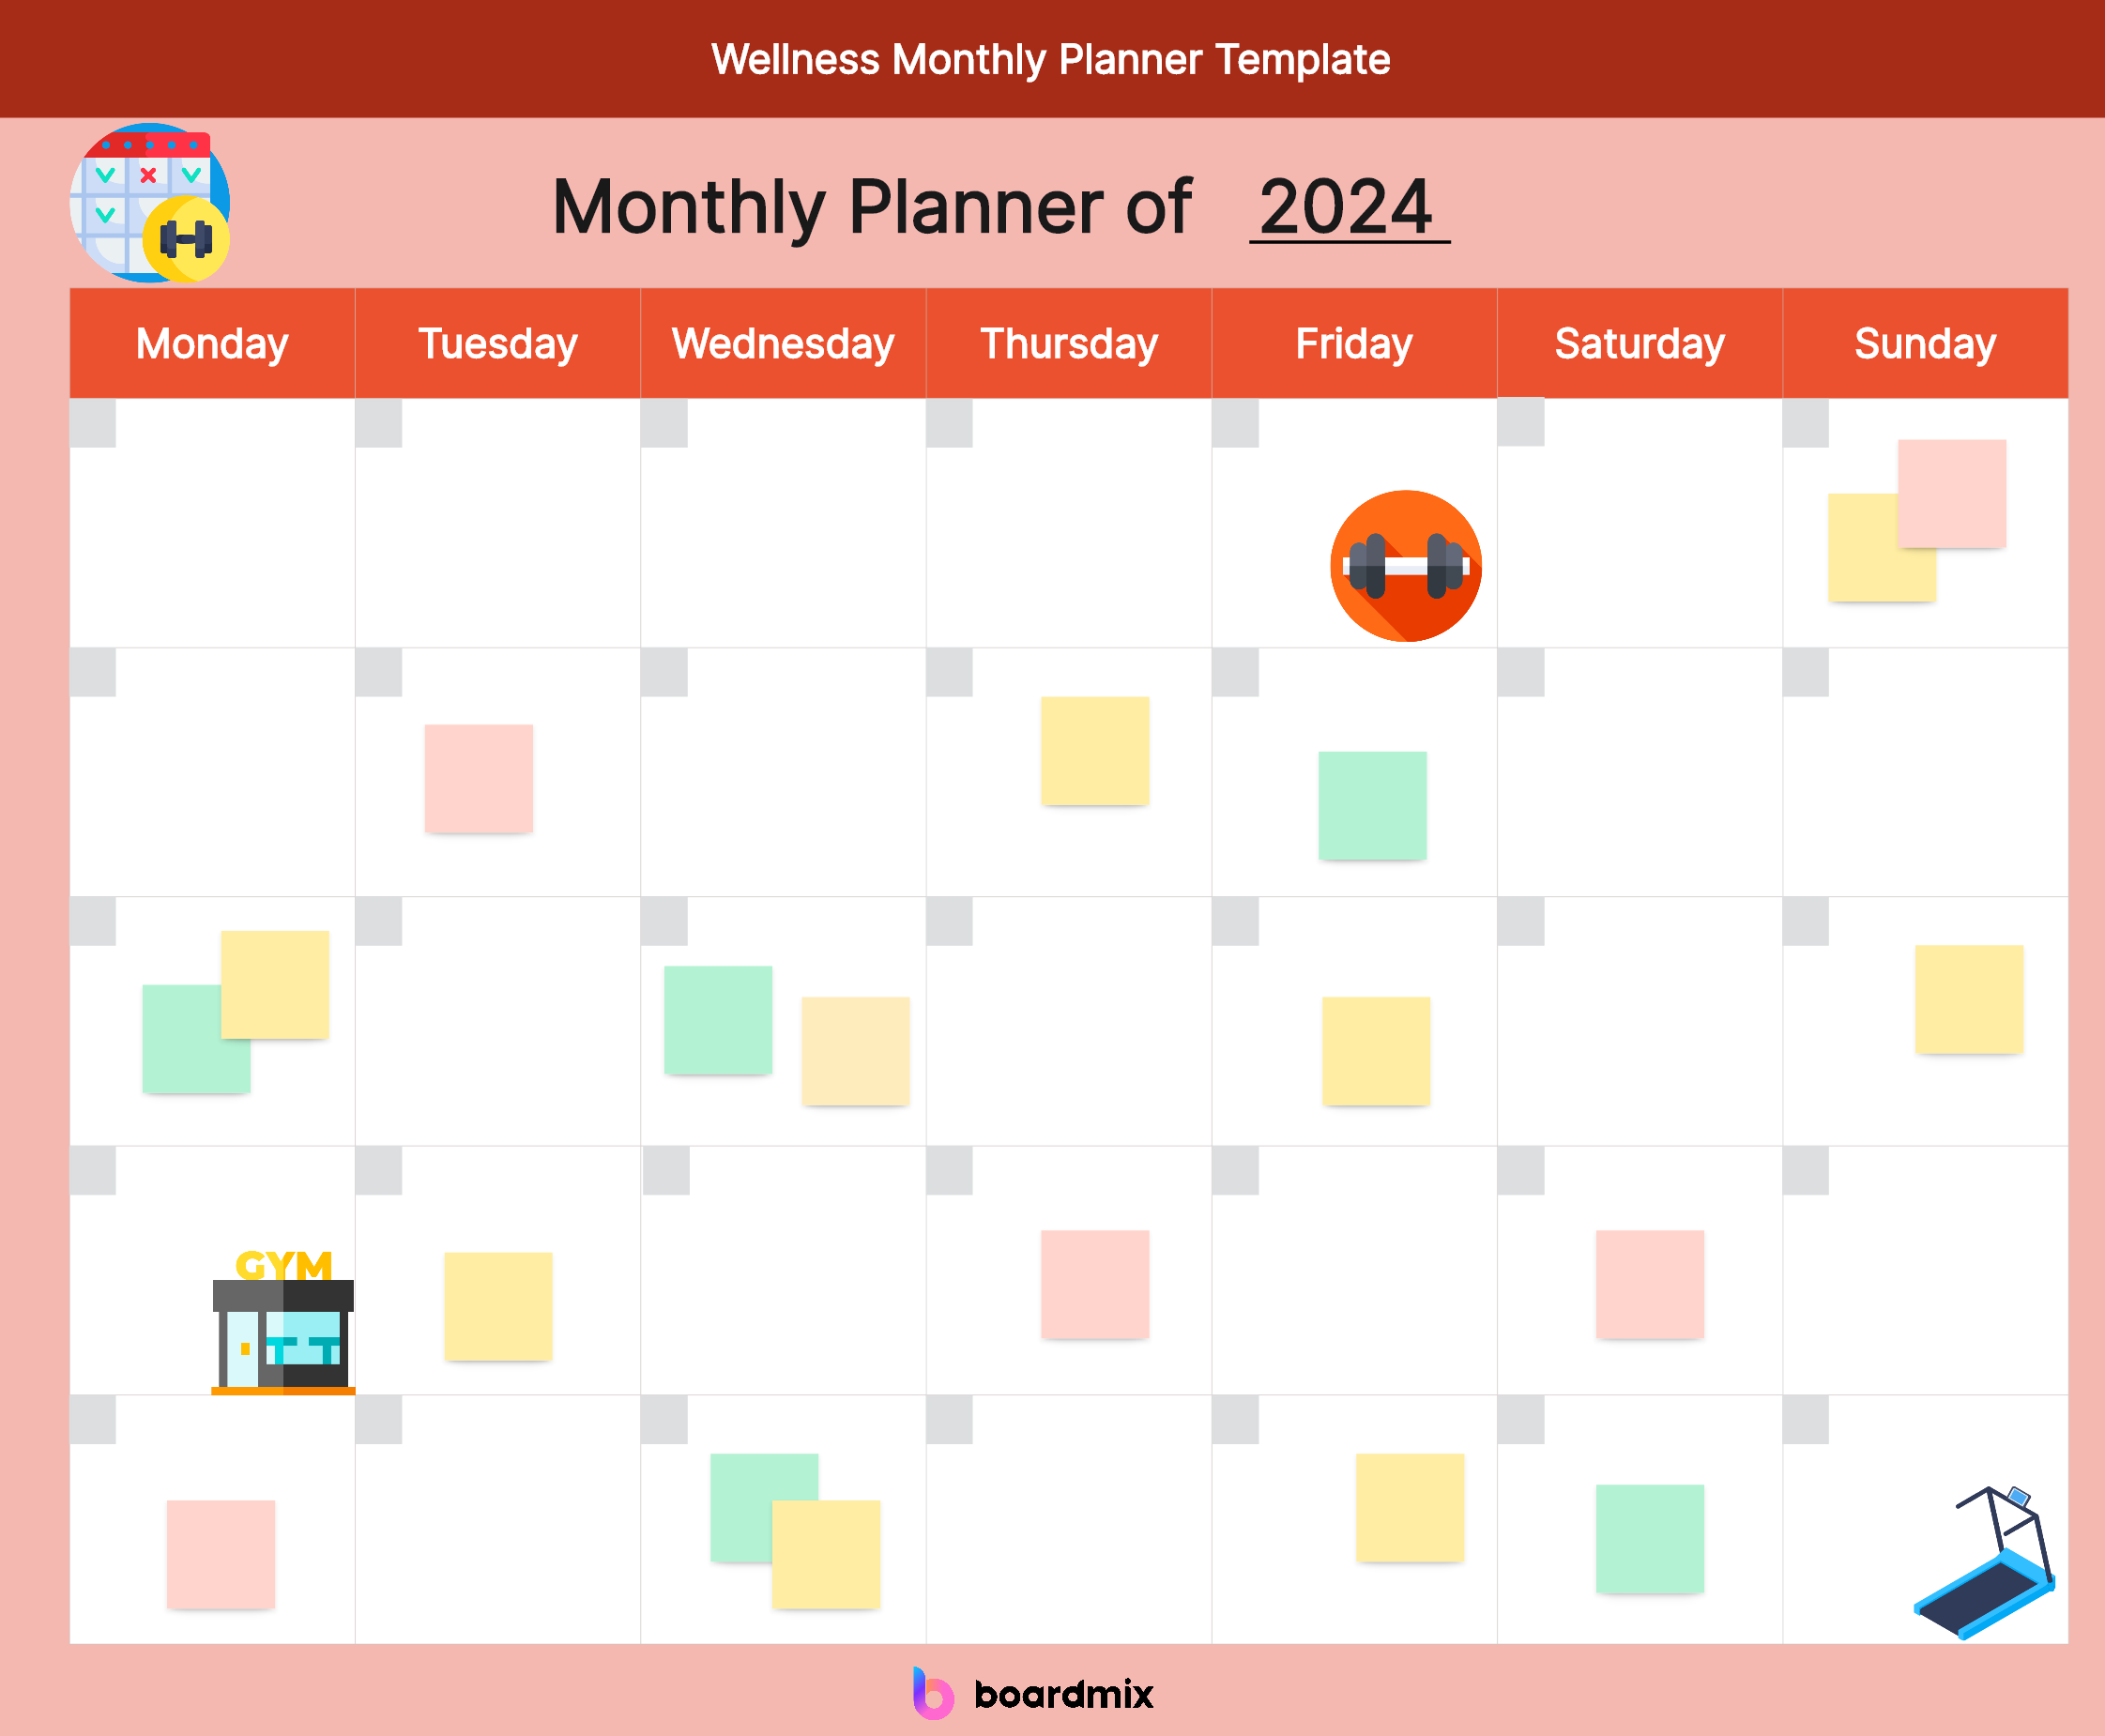 wellness-monthly-planner-template.png